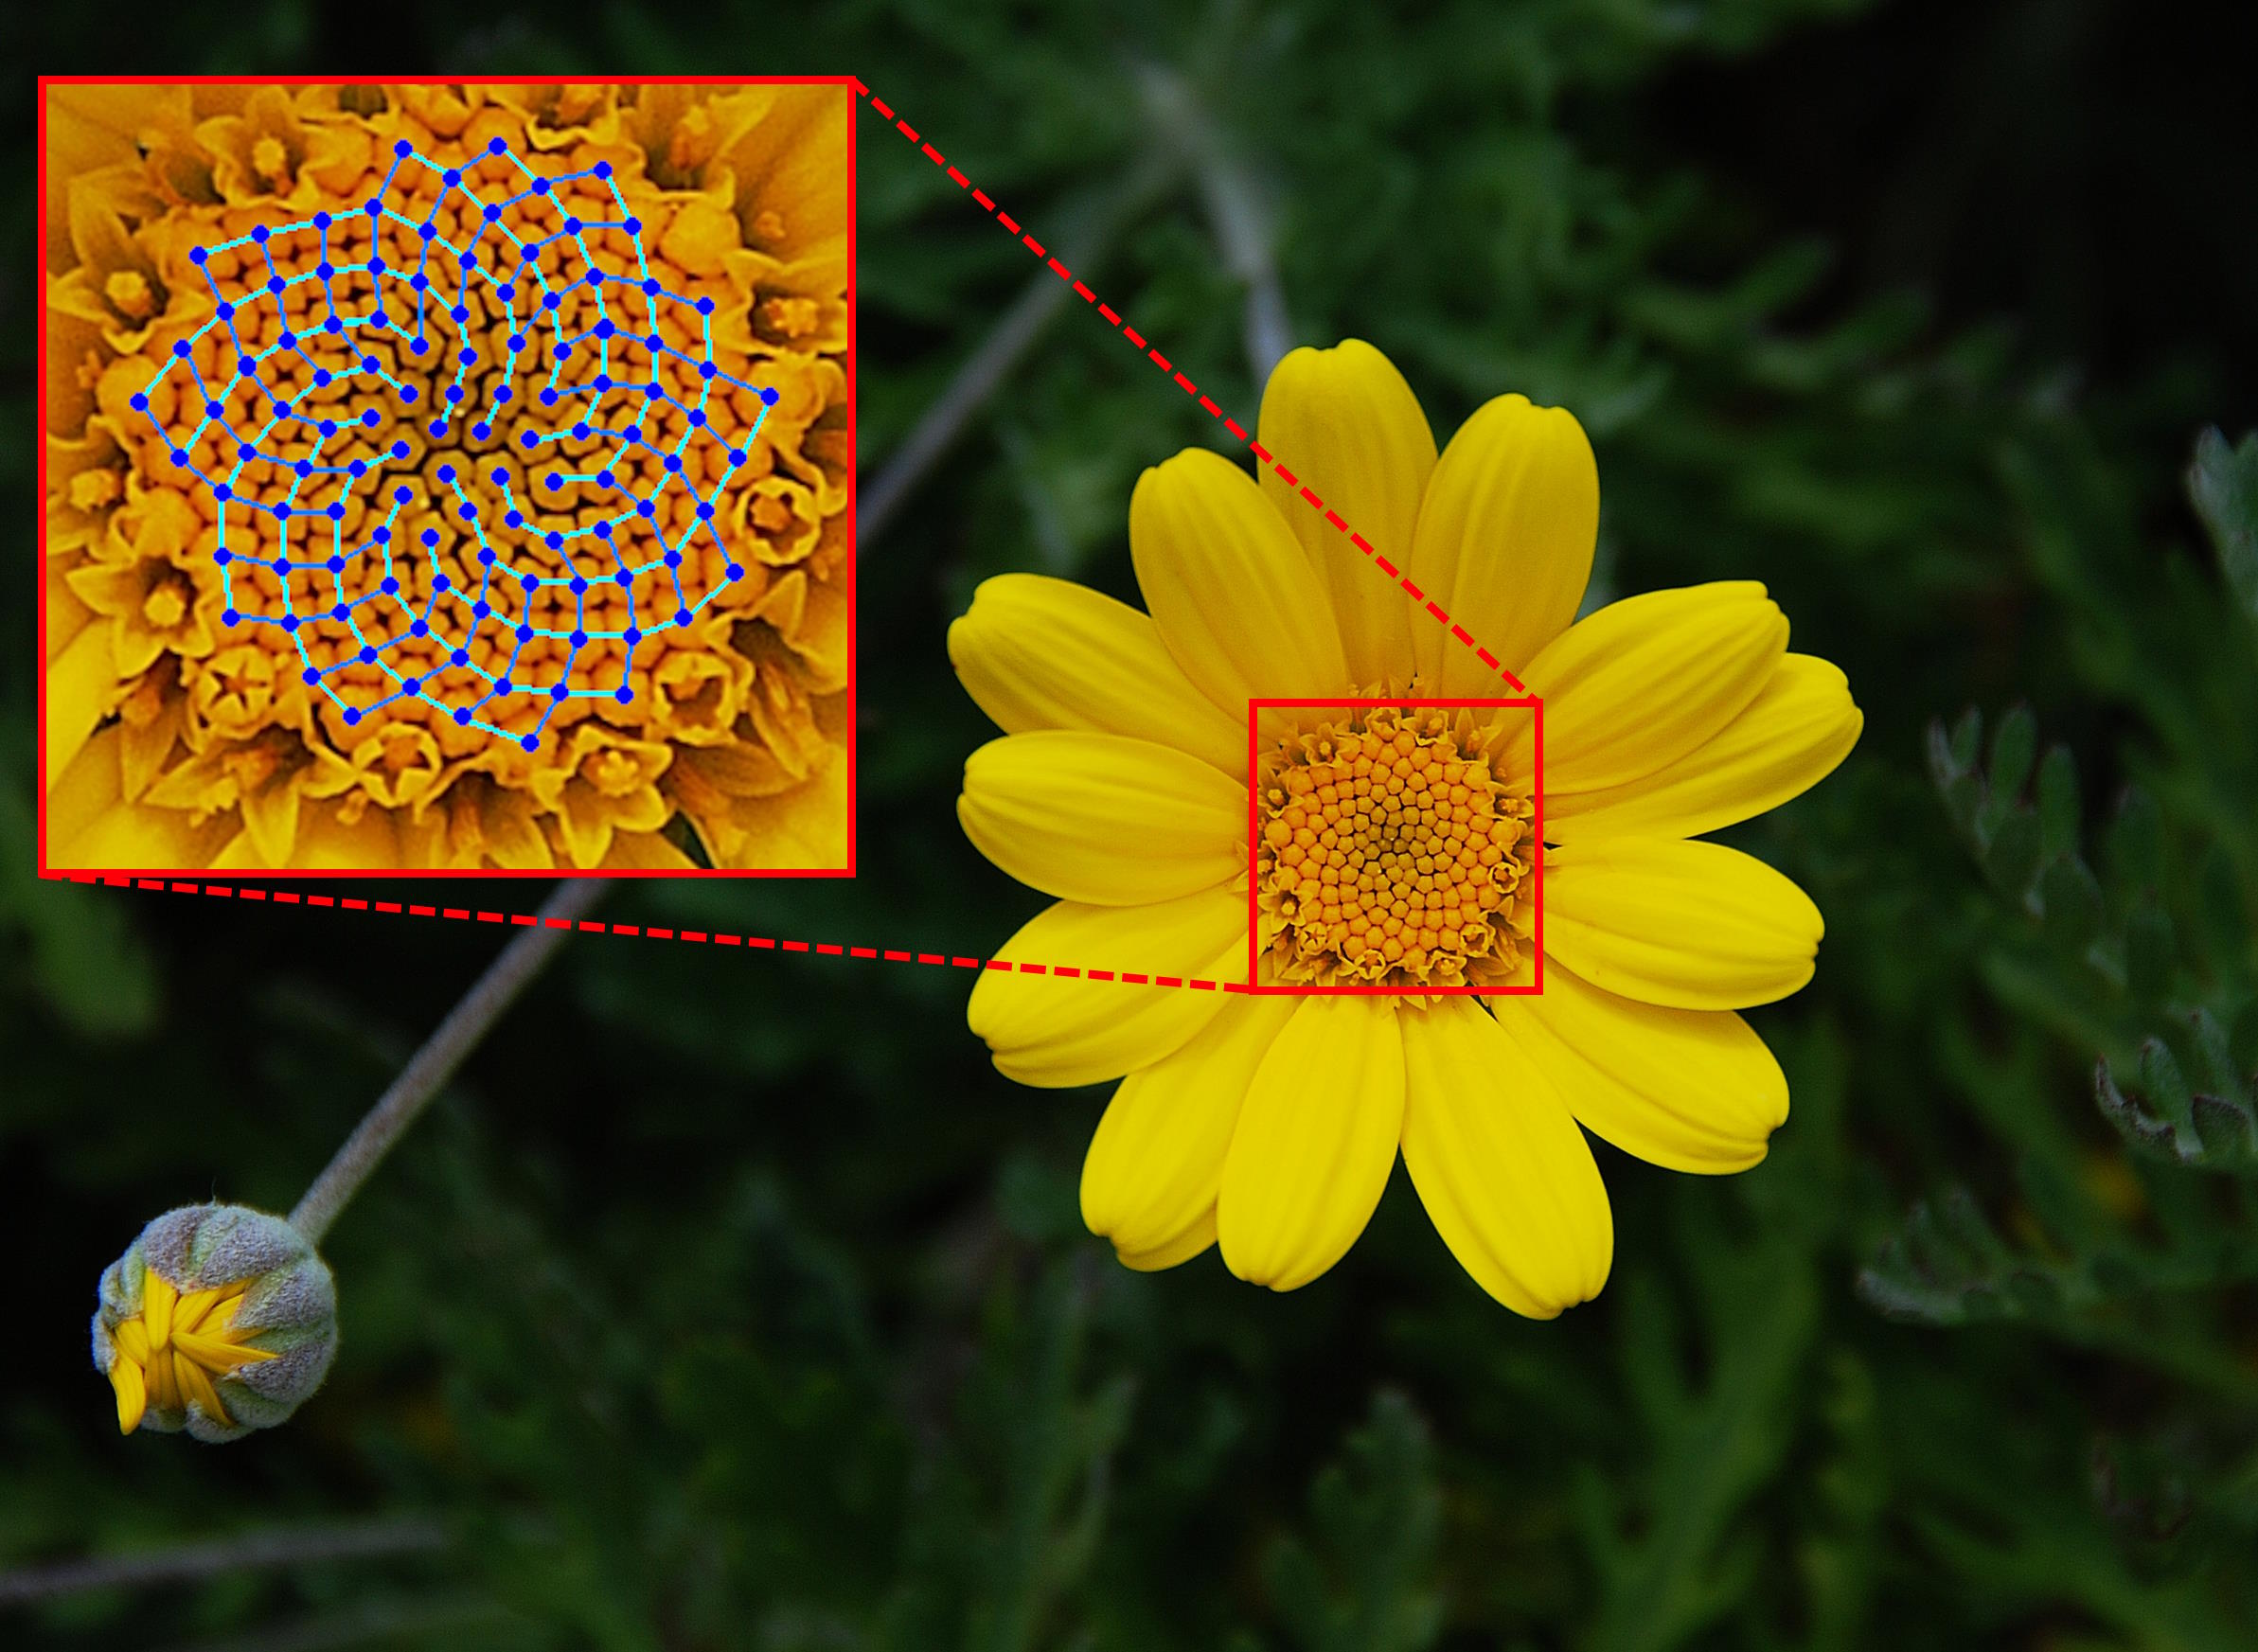 A yellow flower with a blue circle in the middle, providing an explanation of the Fibonacci sequence.